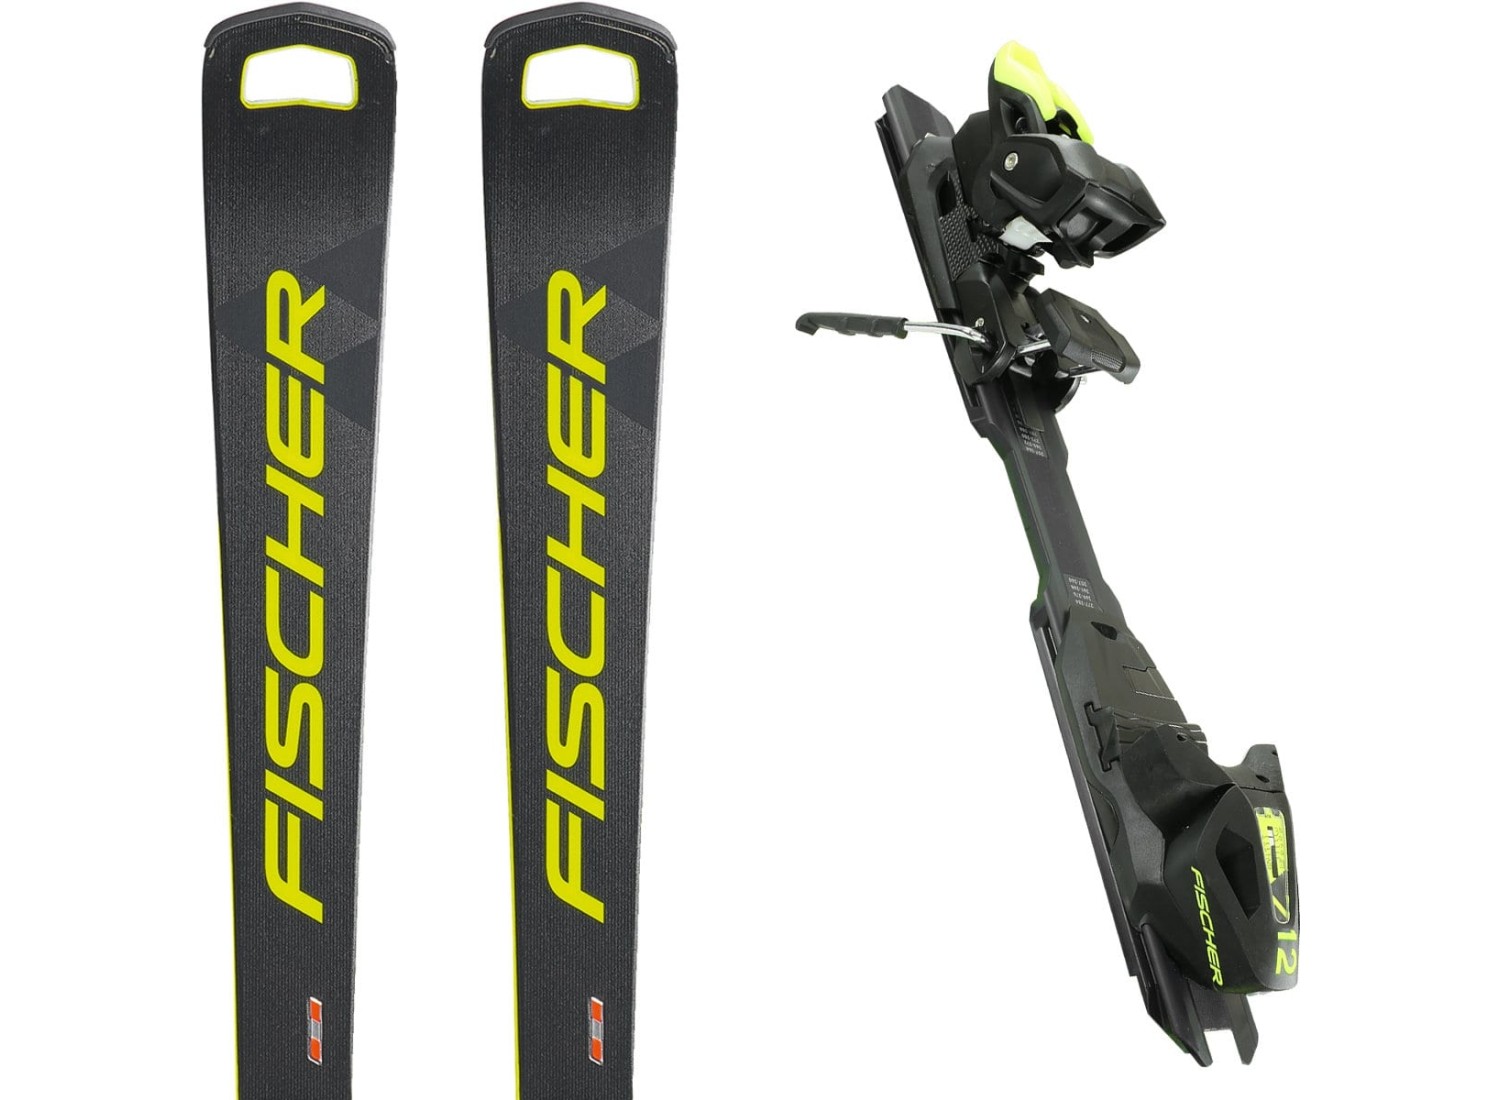 SKI FISCHER RC4 WORLDCUP SC PRO YELLOW BASE 2021 + RC4 Z13 M/O PLATE